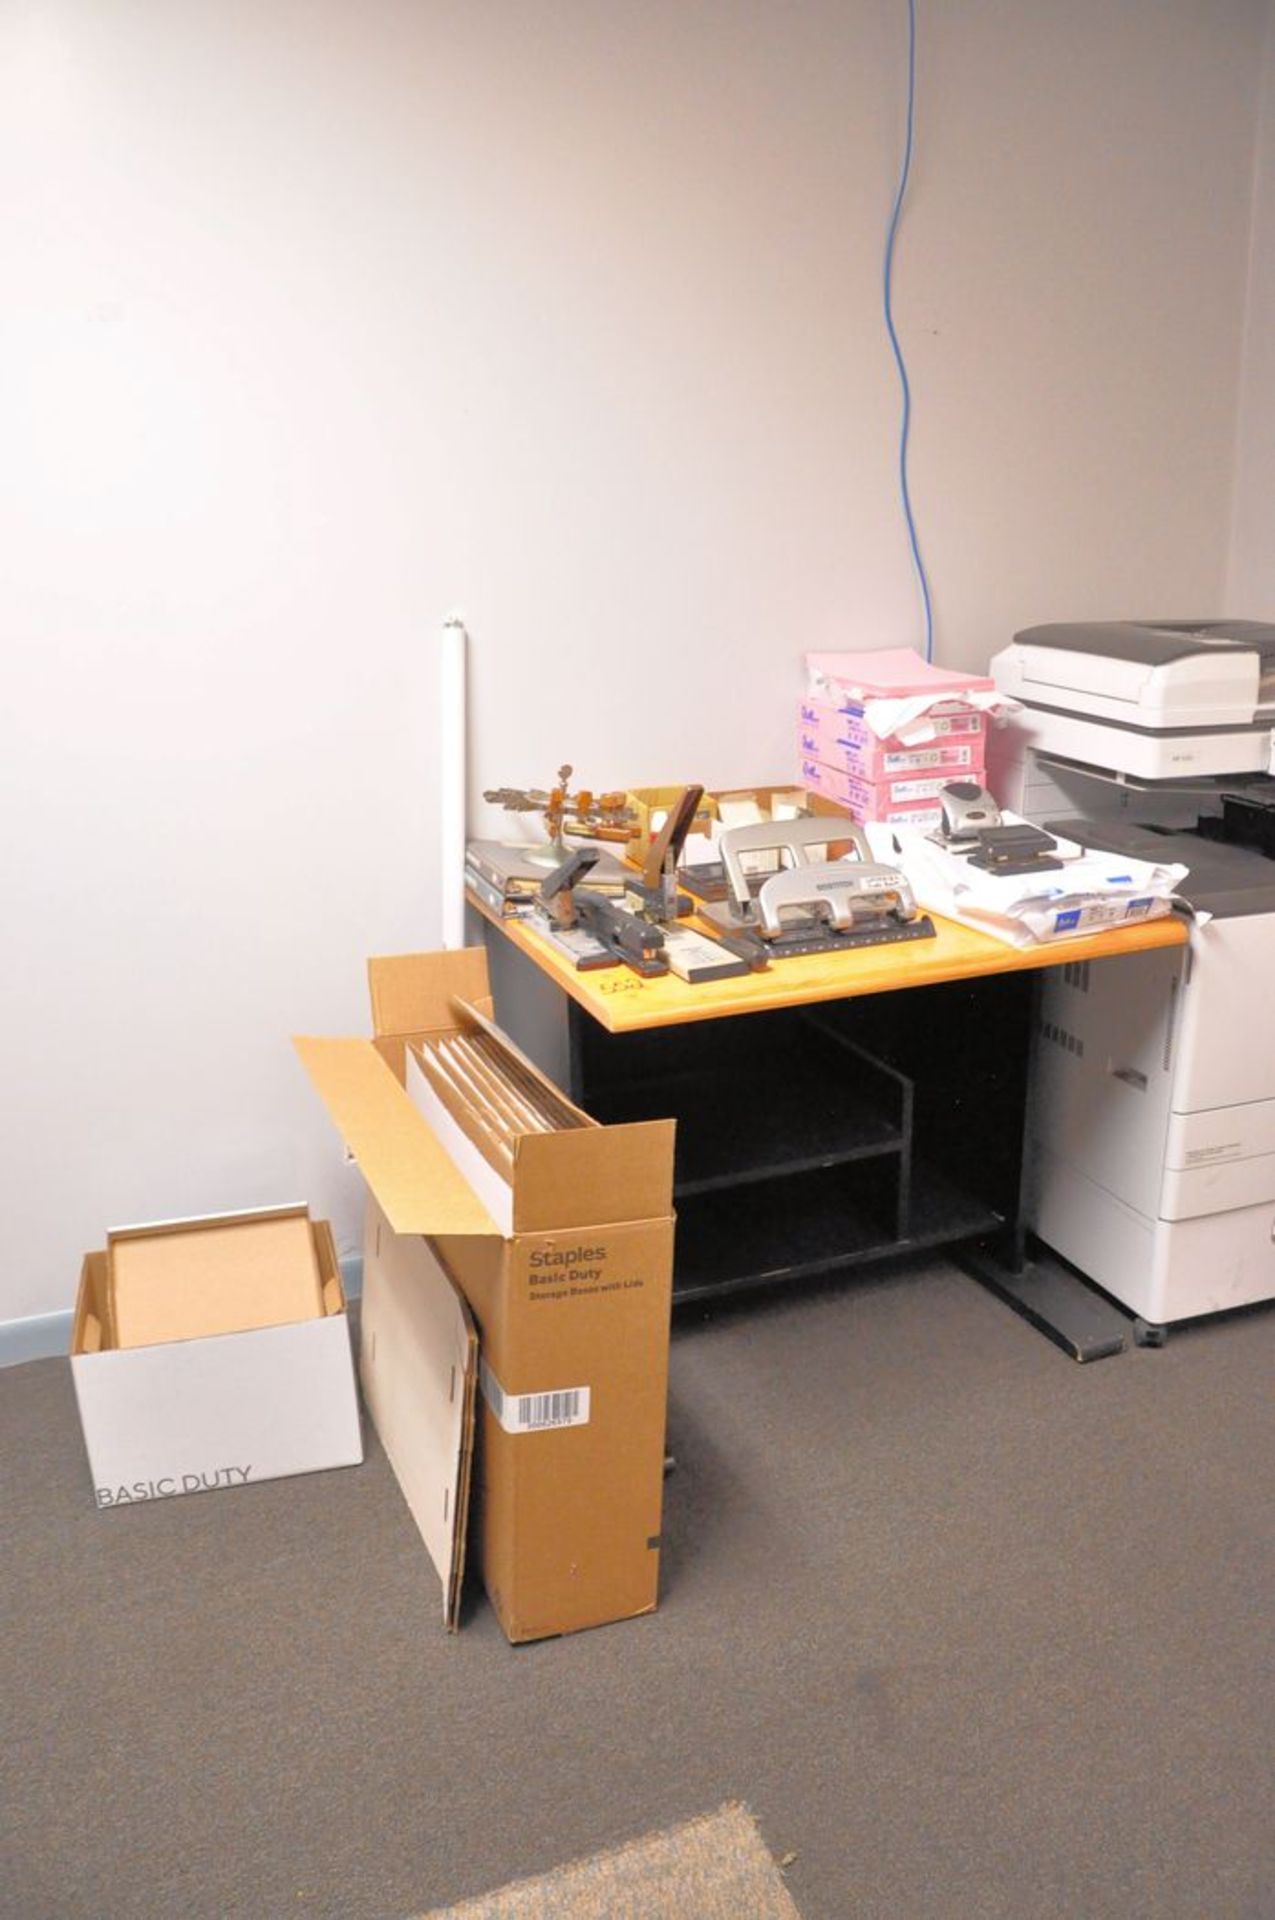 Lot - Desk and Cart with Office Supplies, in (1) Room